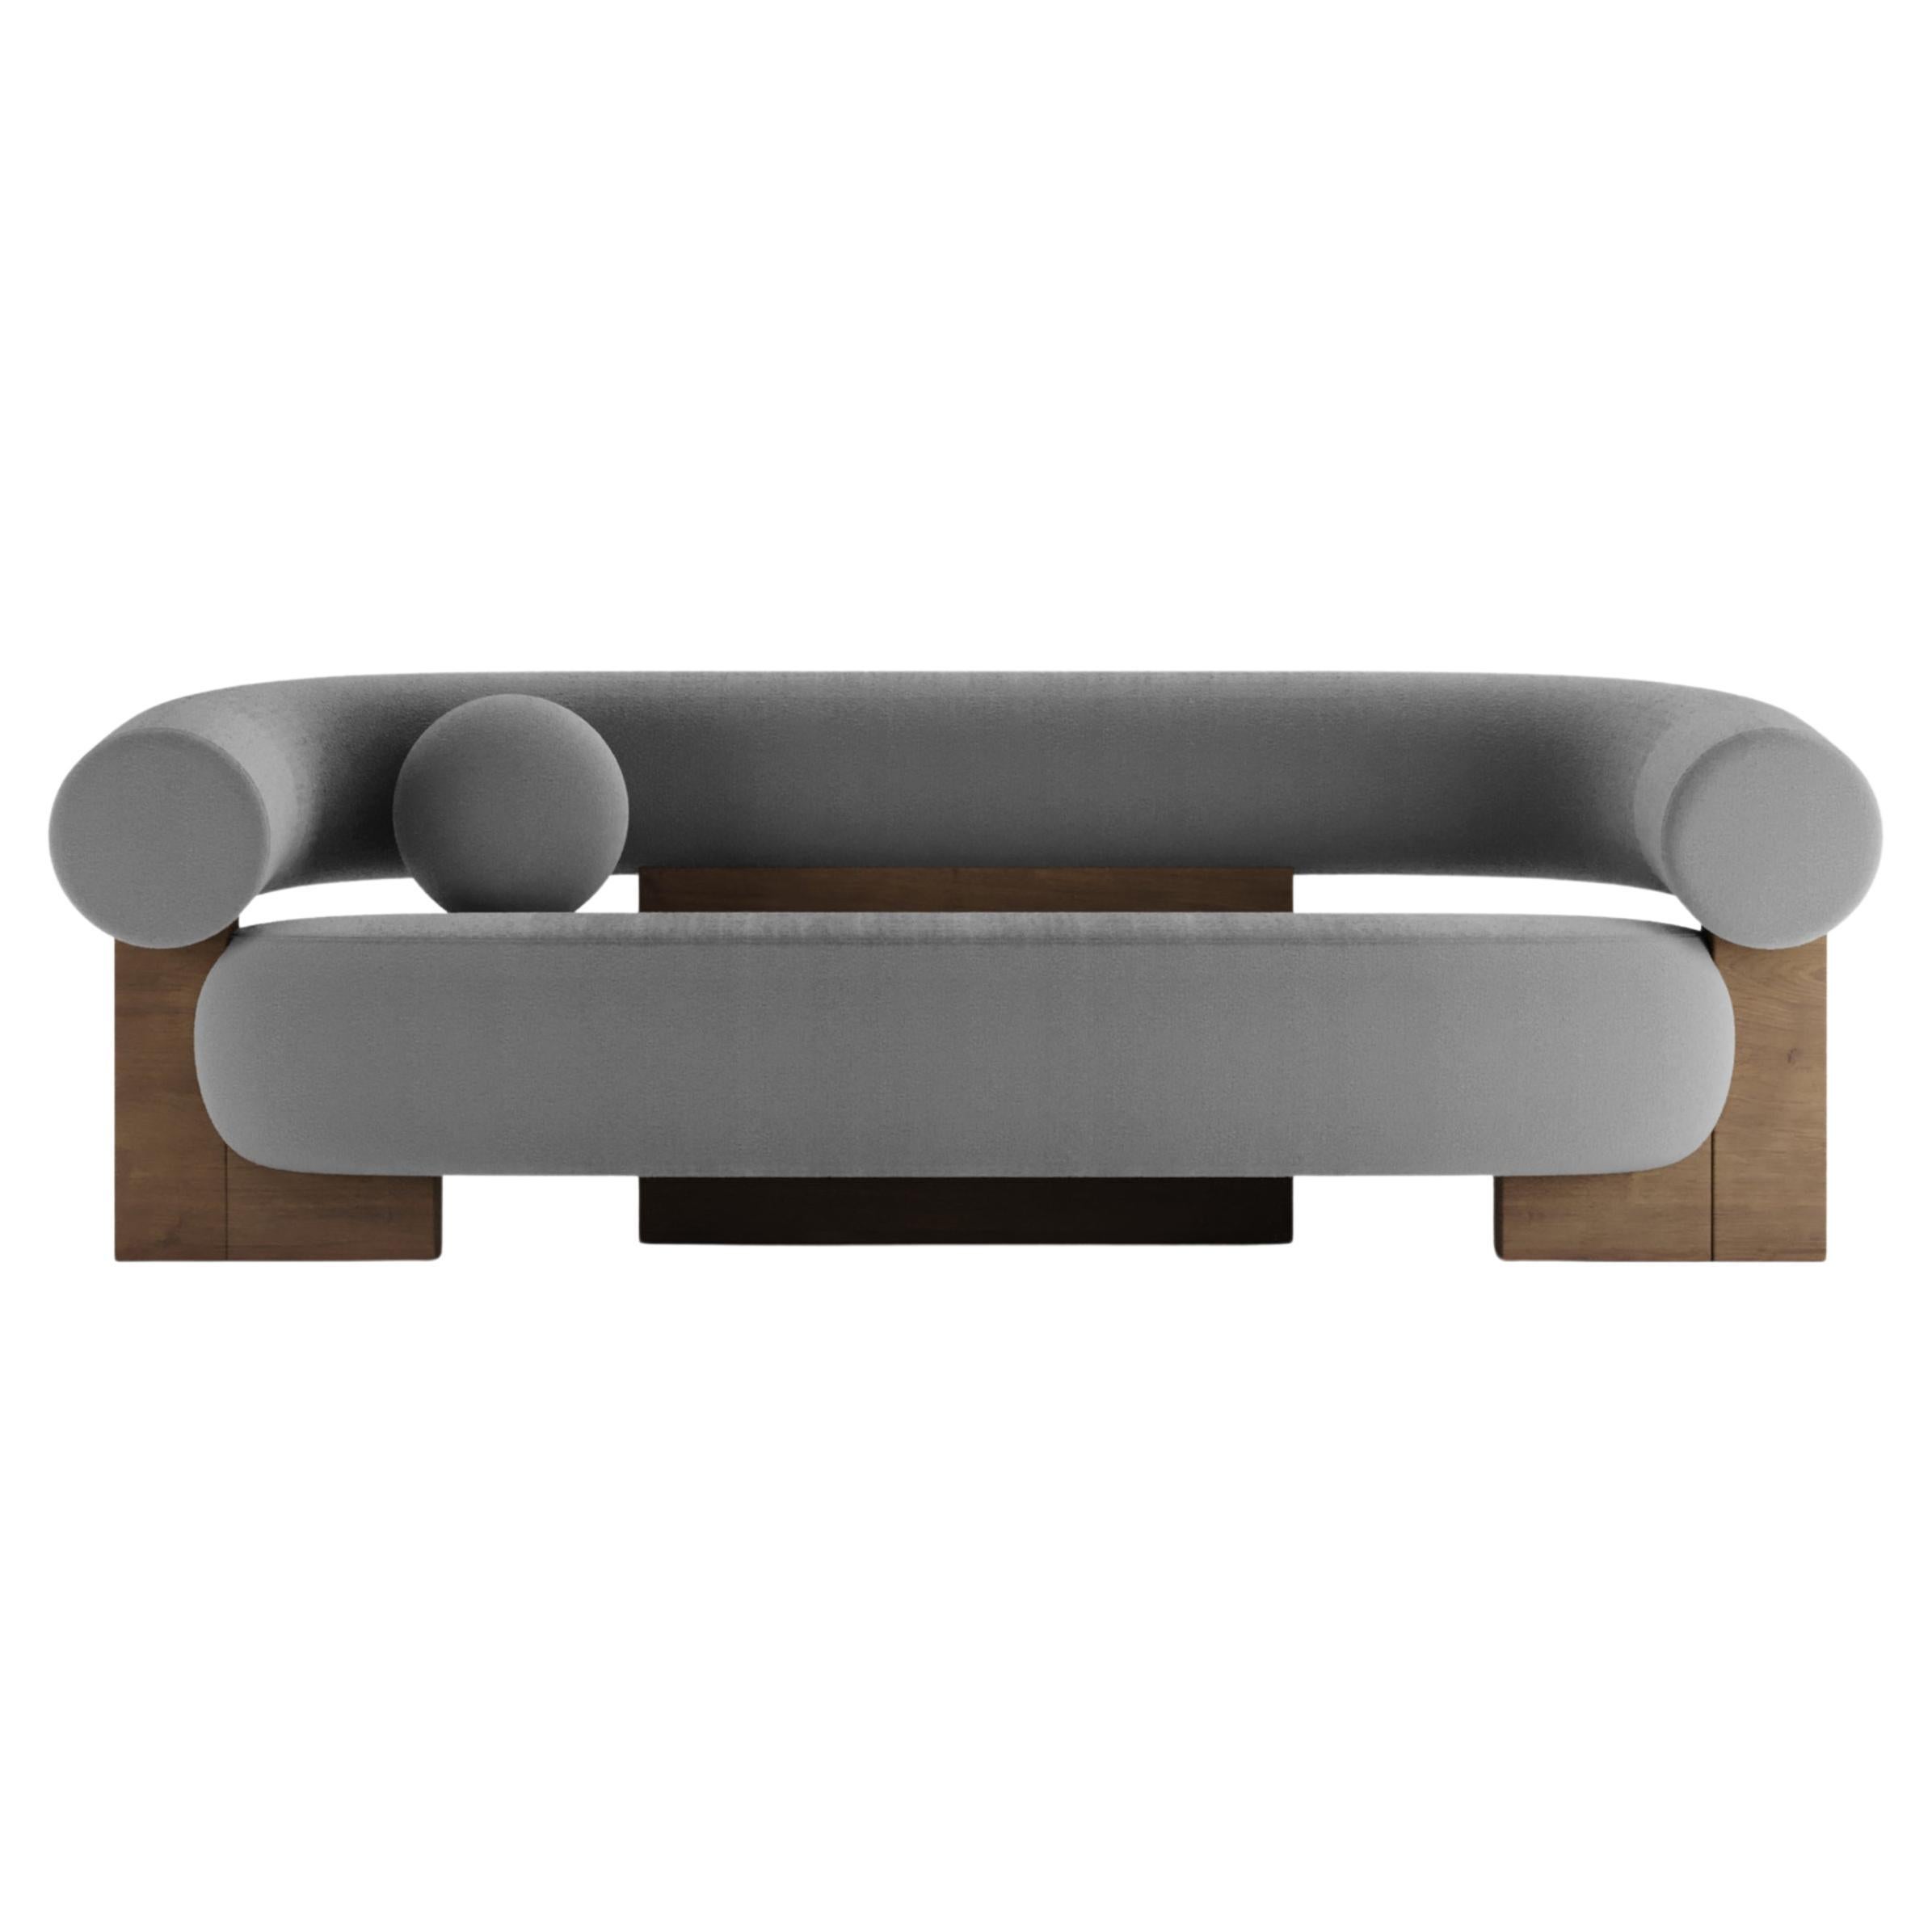 Contemporary Modern Cassete Sofa in Charcoal & Wood by Collector Studio